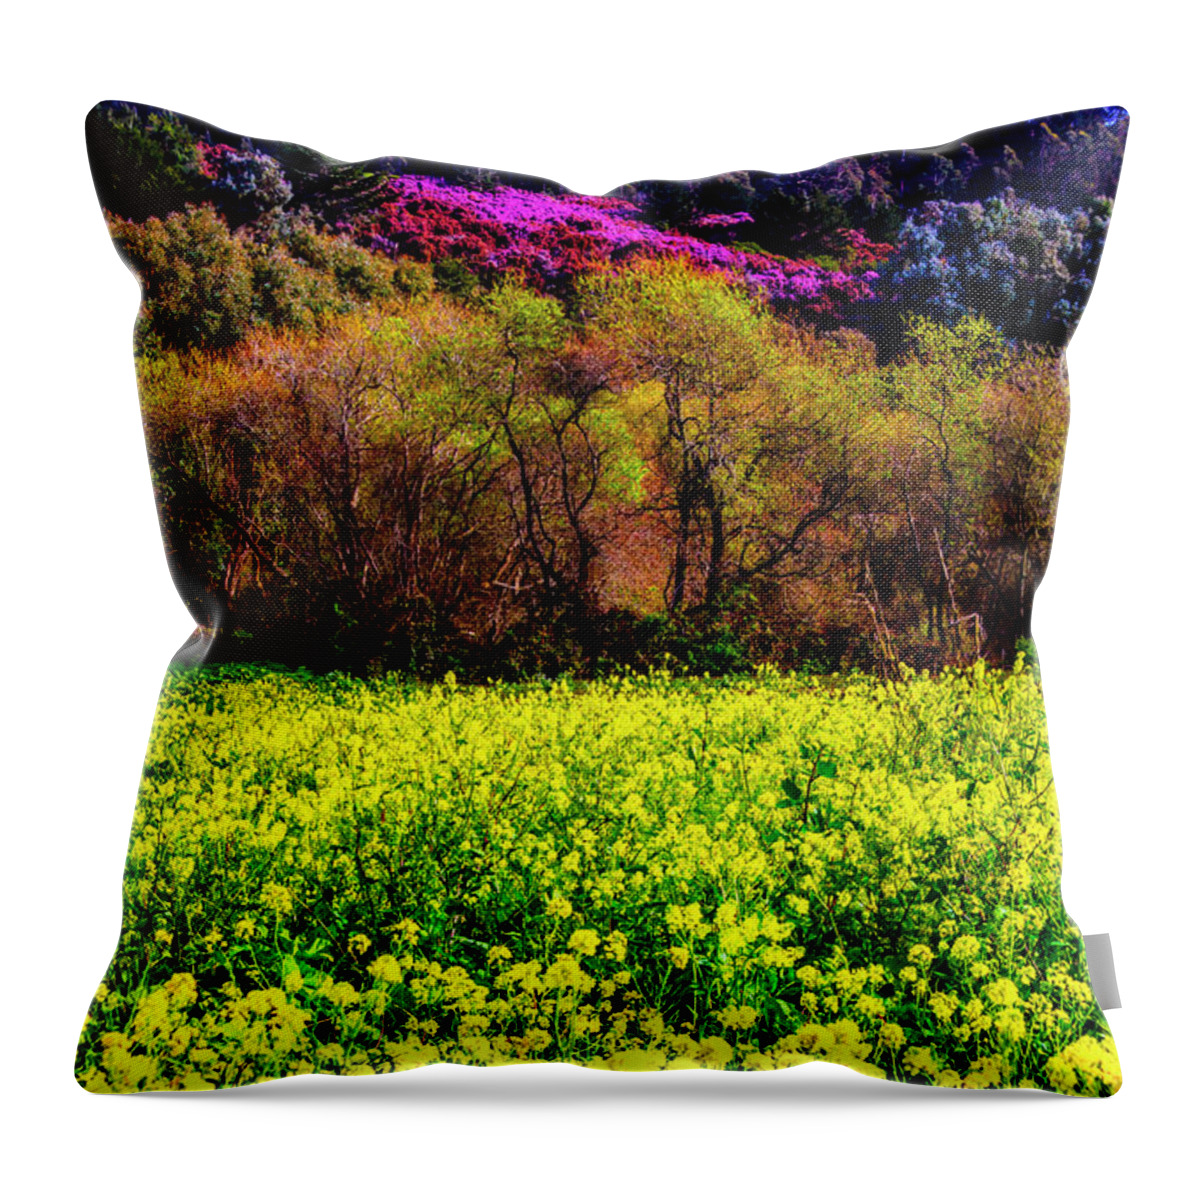 Spring Throw Pillow featuring the photograph Spring Field by Garry Gay